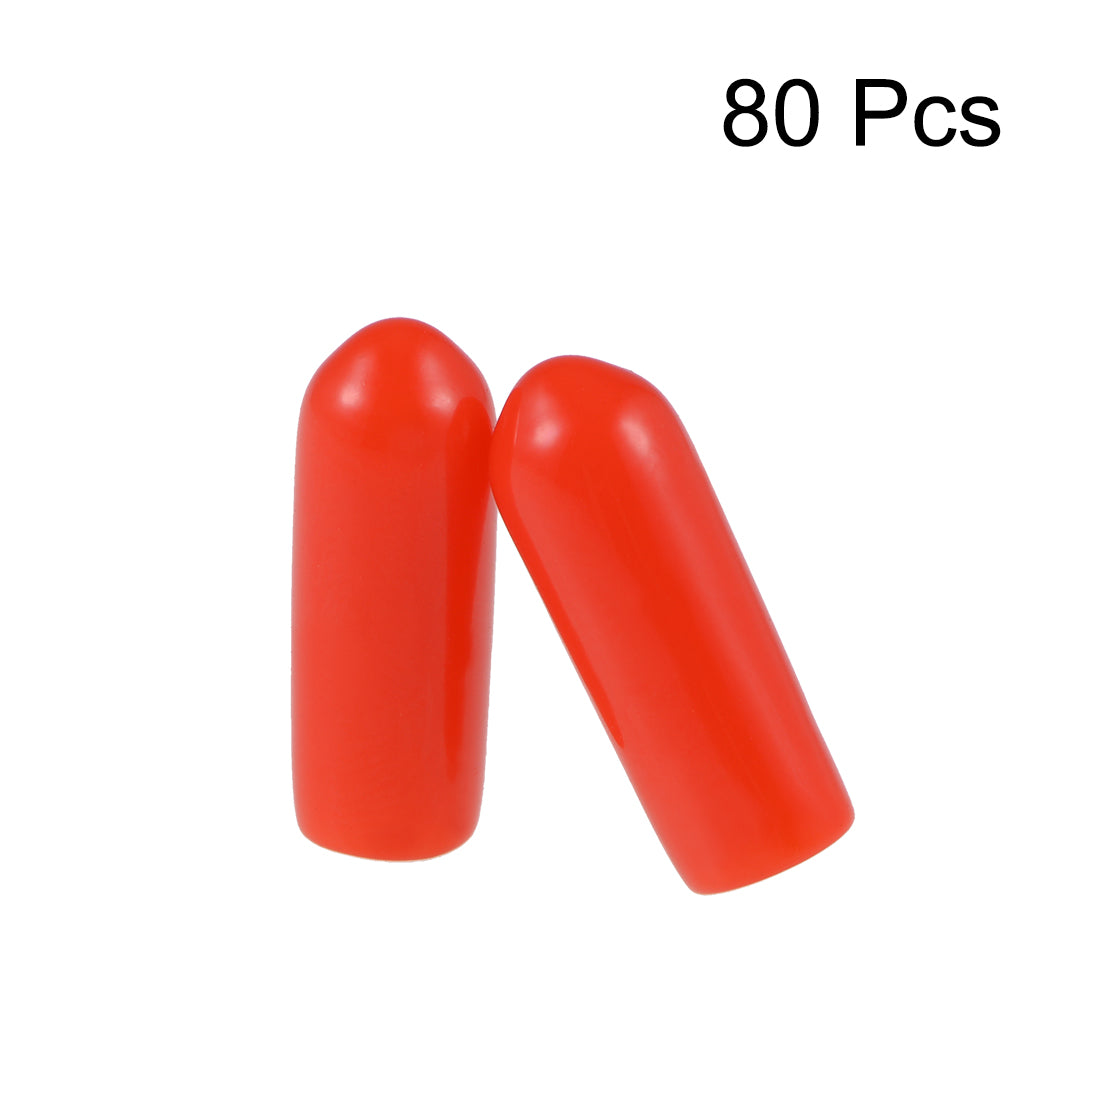 uxcell Uxcell 80pcs Rubber End Caps 3.5mm ID 15mm Height Screw Thread Protectors Red